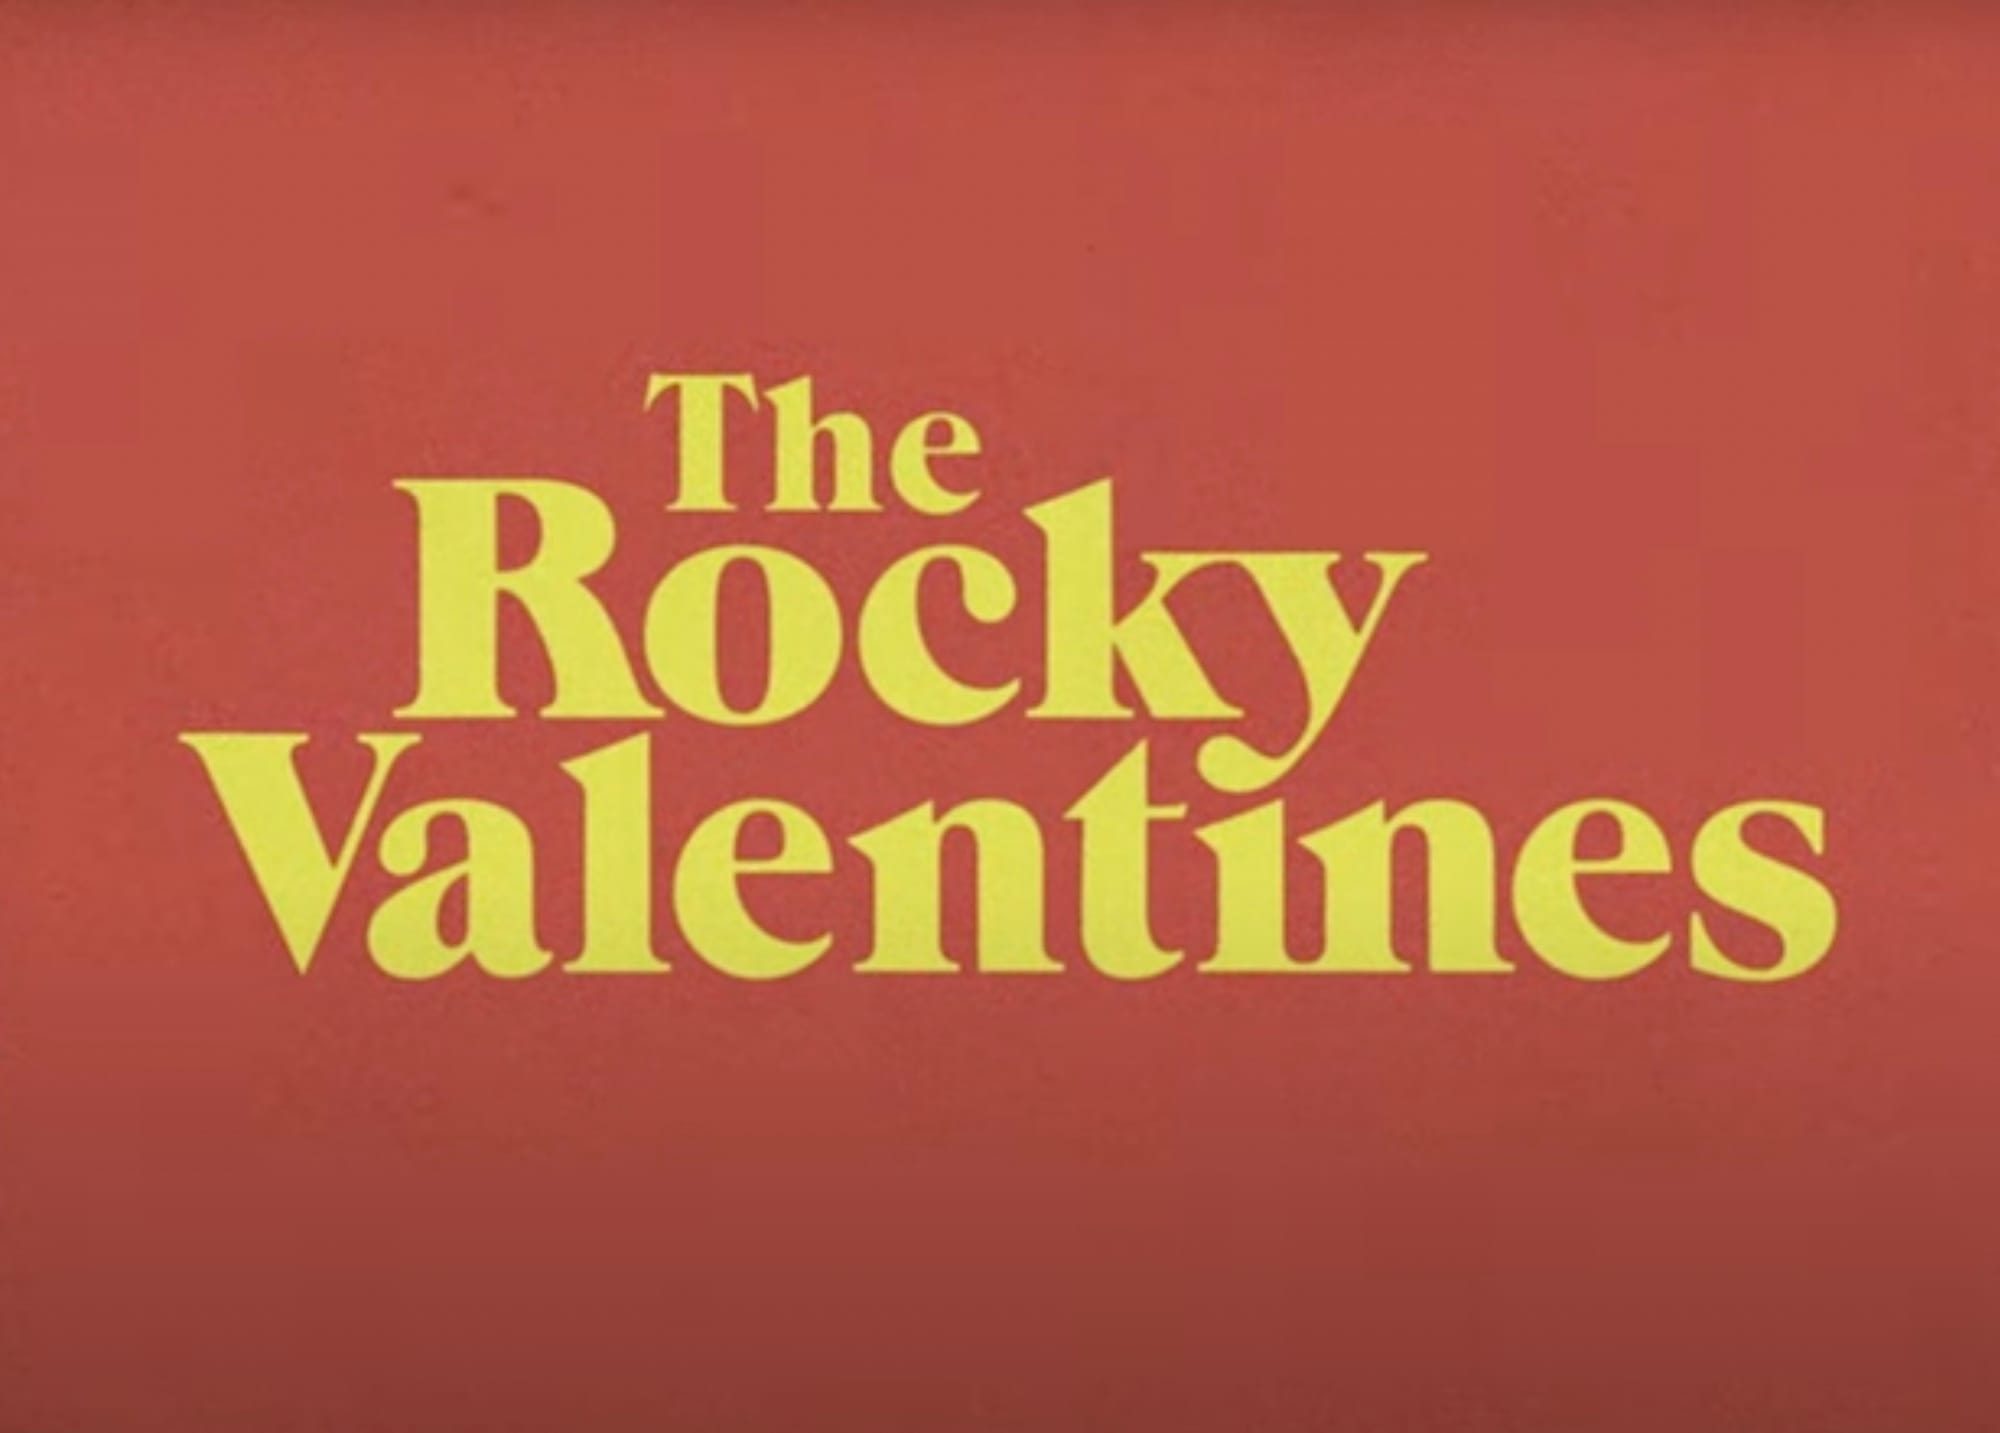 Starflyer's Jason Martin Teams Up With Son, Charlie Martin, On Rocky Valentines Project